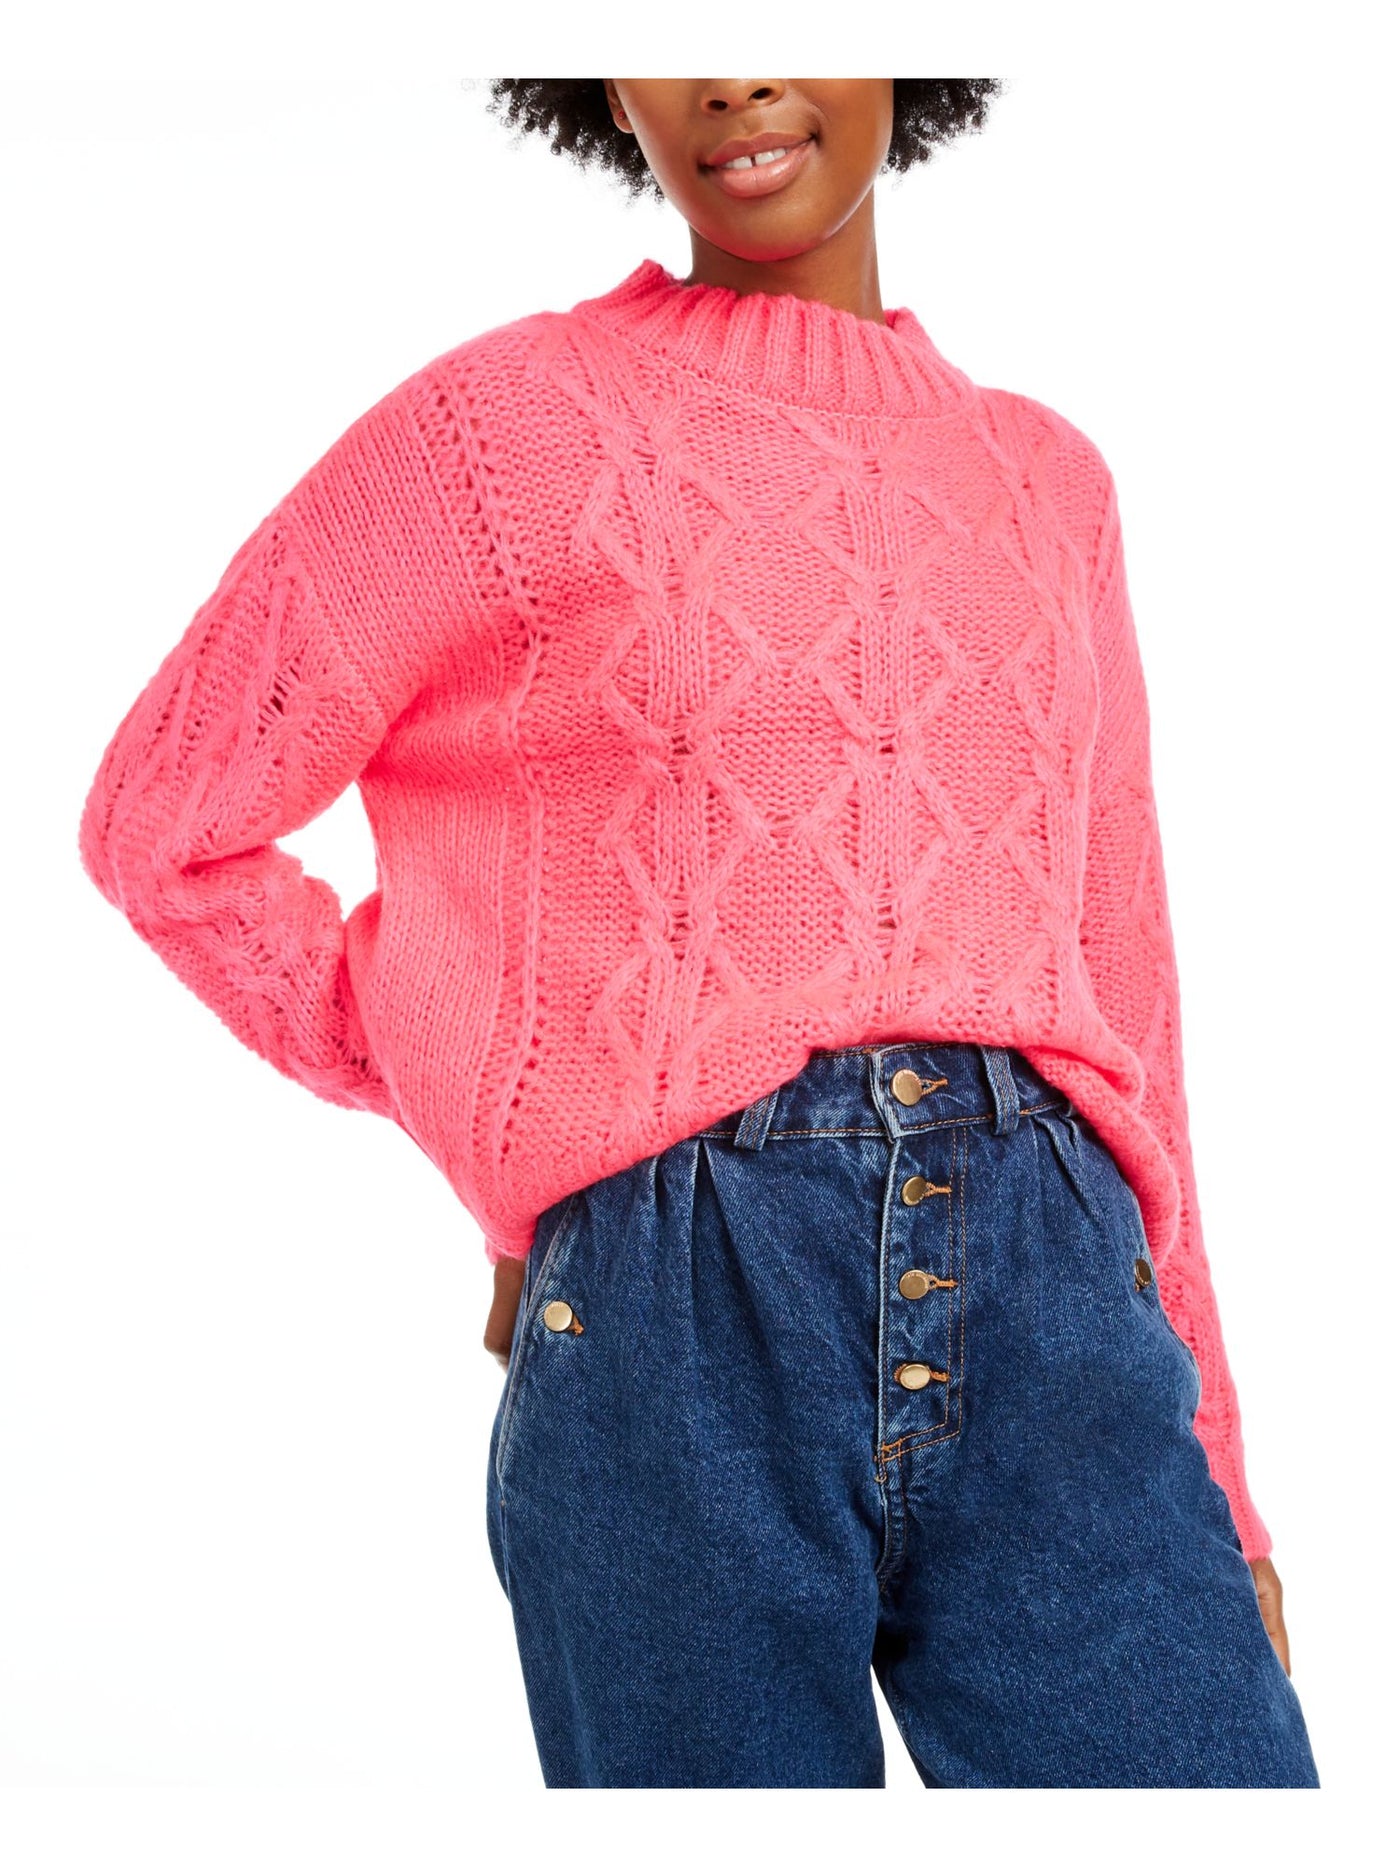 HOOKED UP Womens Pink Long Sleeve Turtle Neck Sweater L